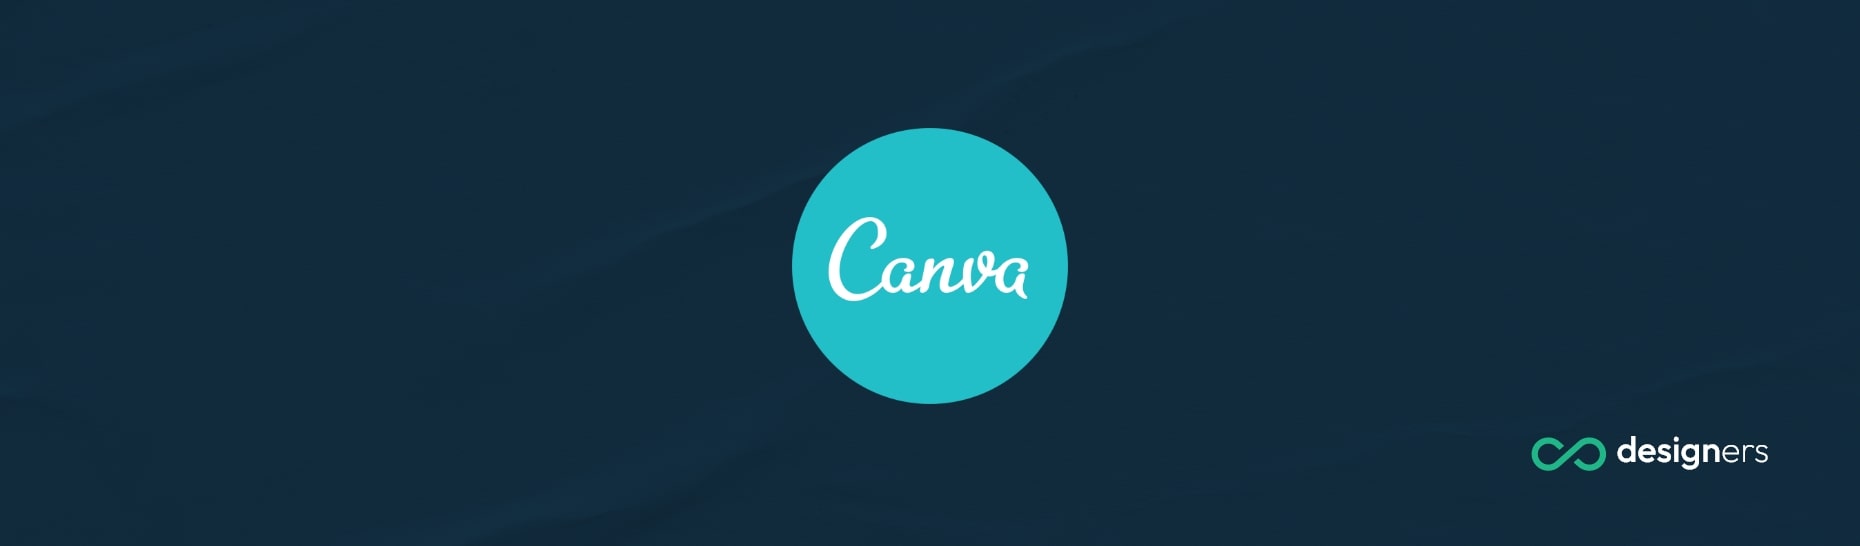 Is Canva a Chinese App?